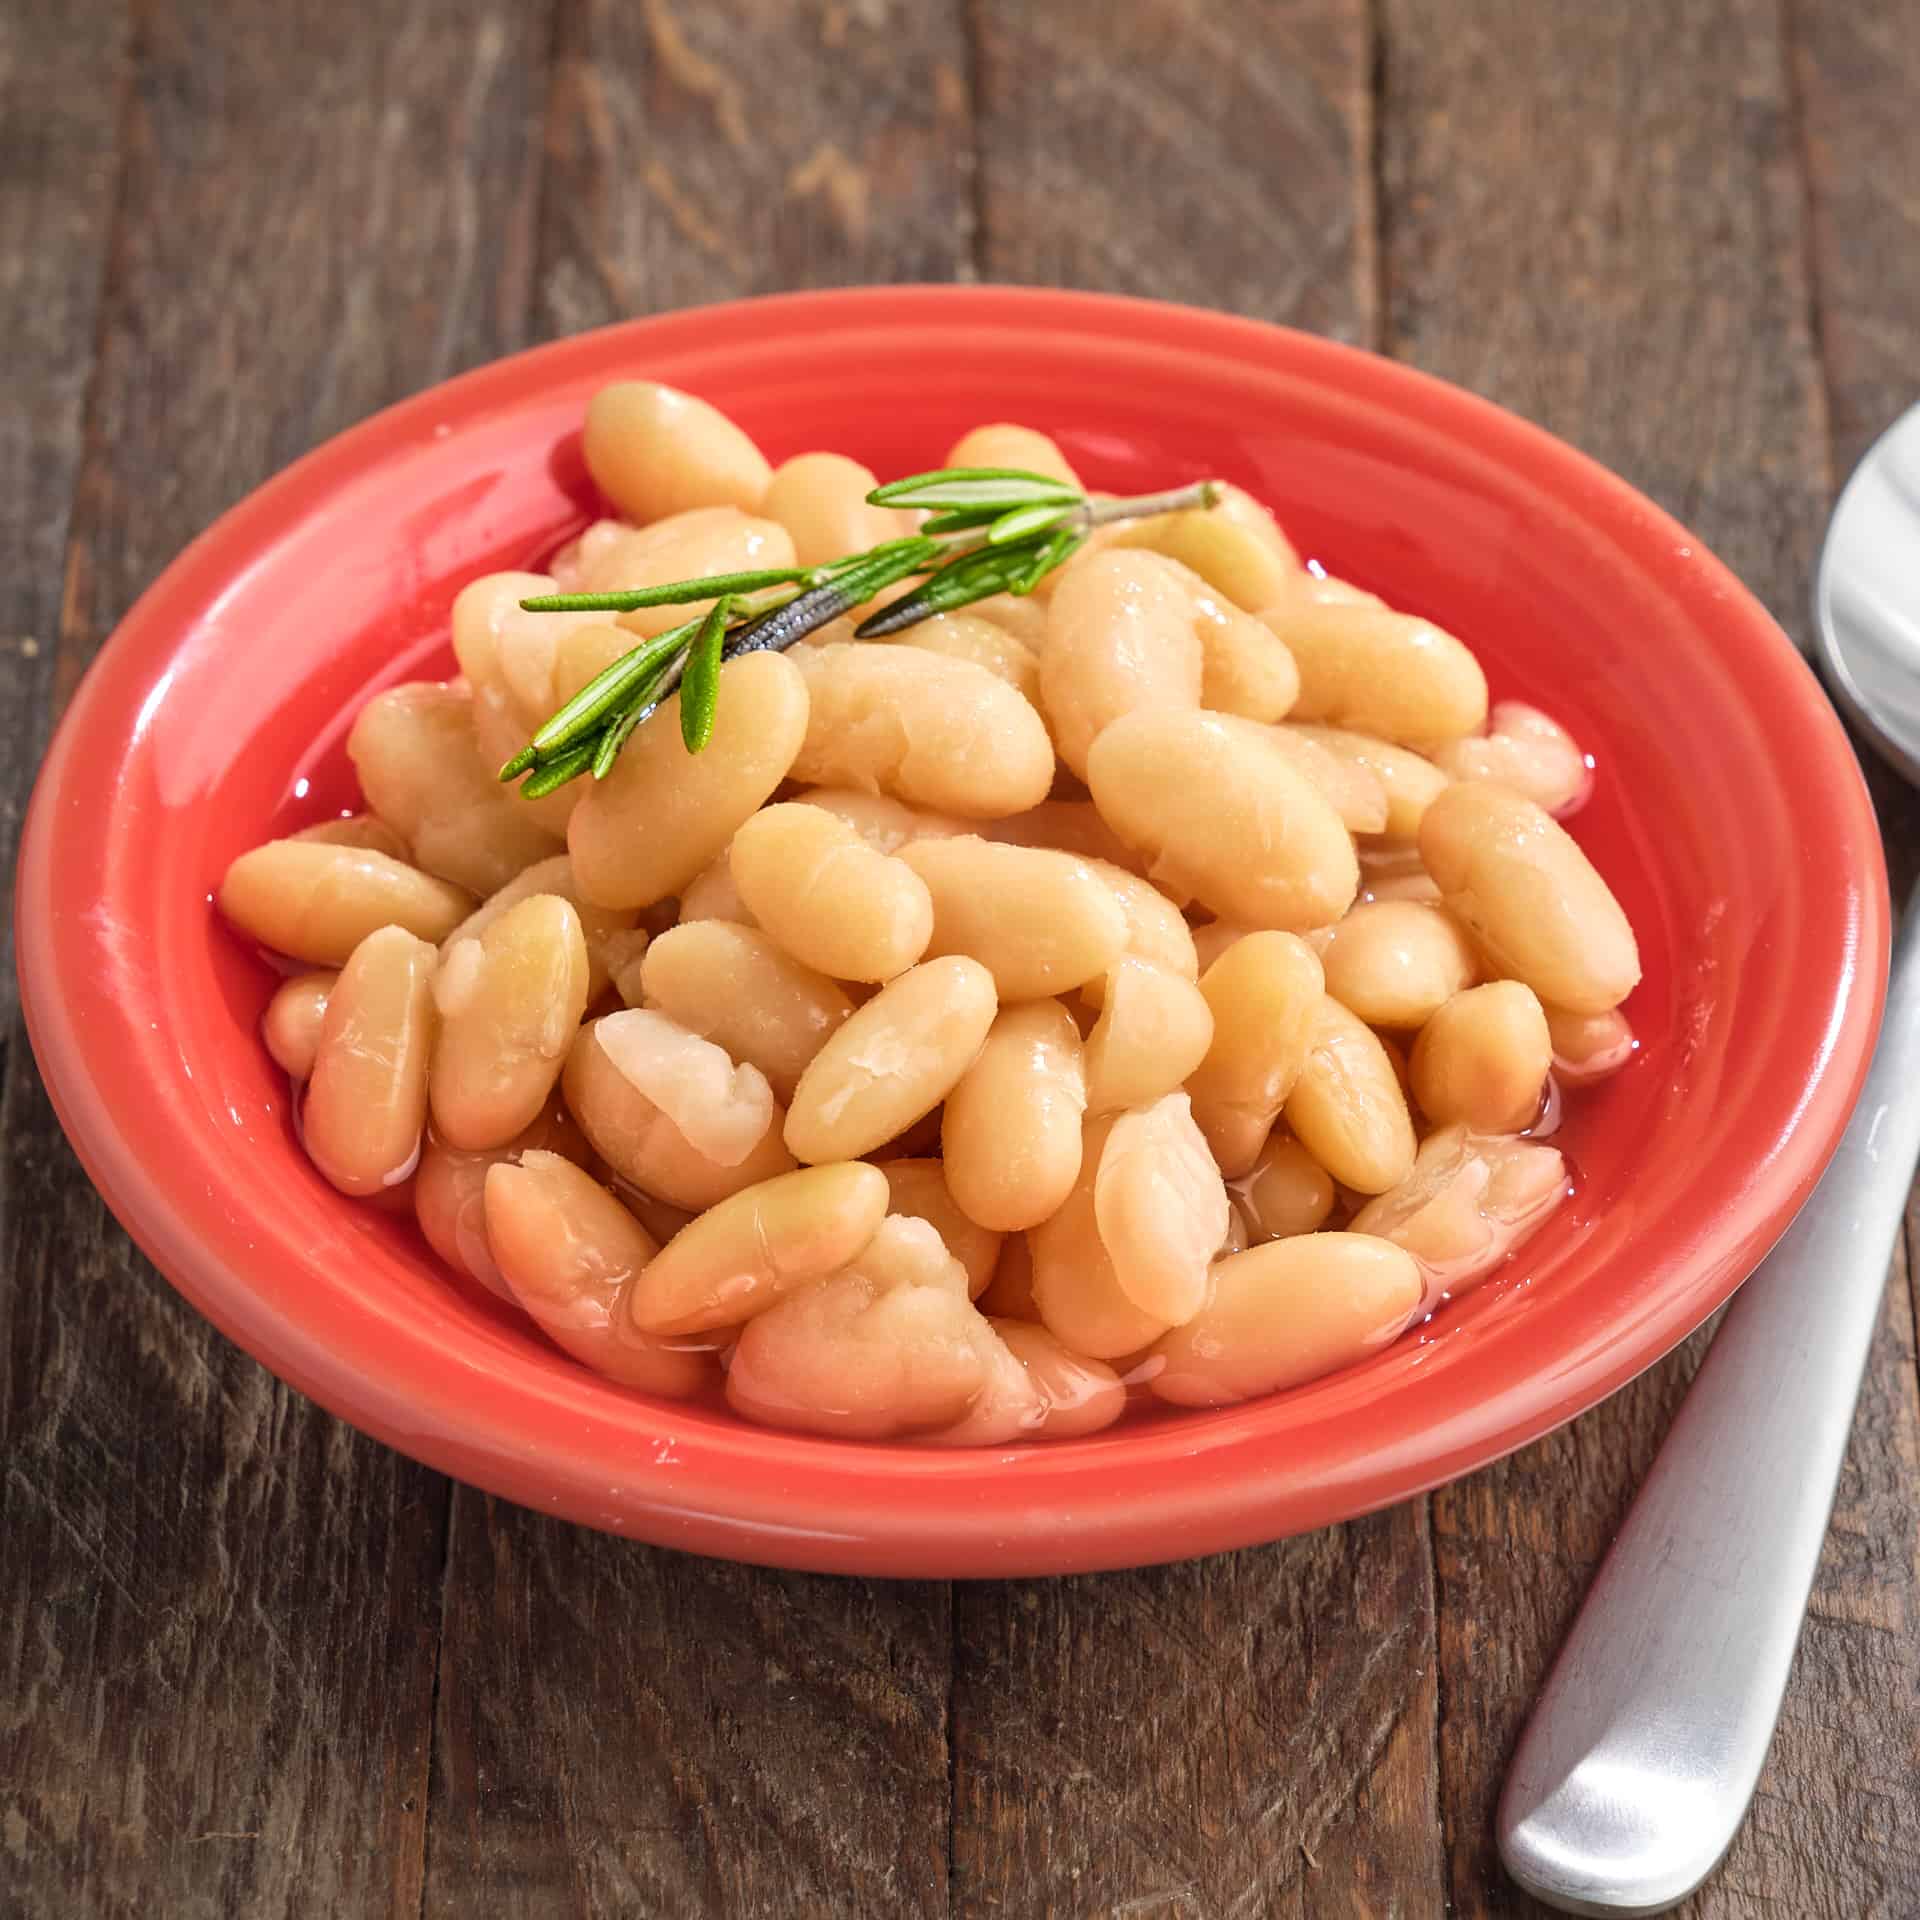 A bowl of cannellini beans with a sprig of rosemary on top and a spoon on the side